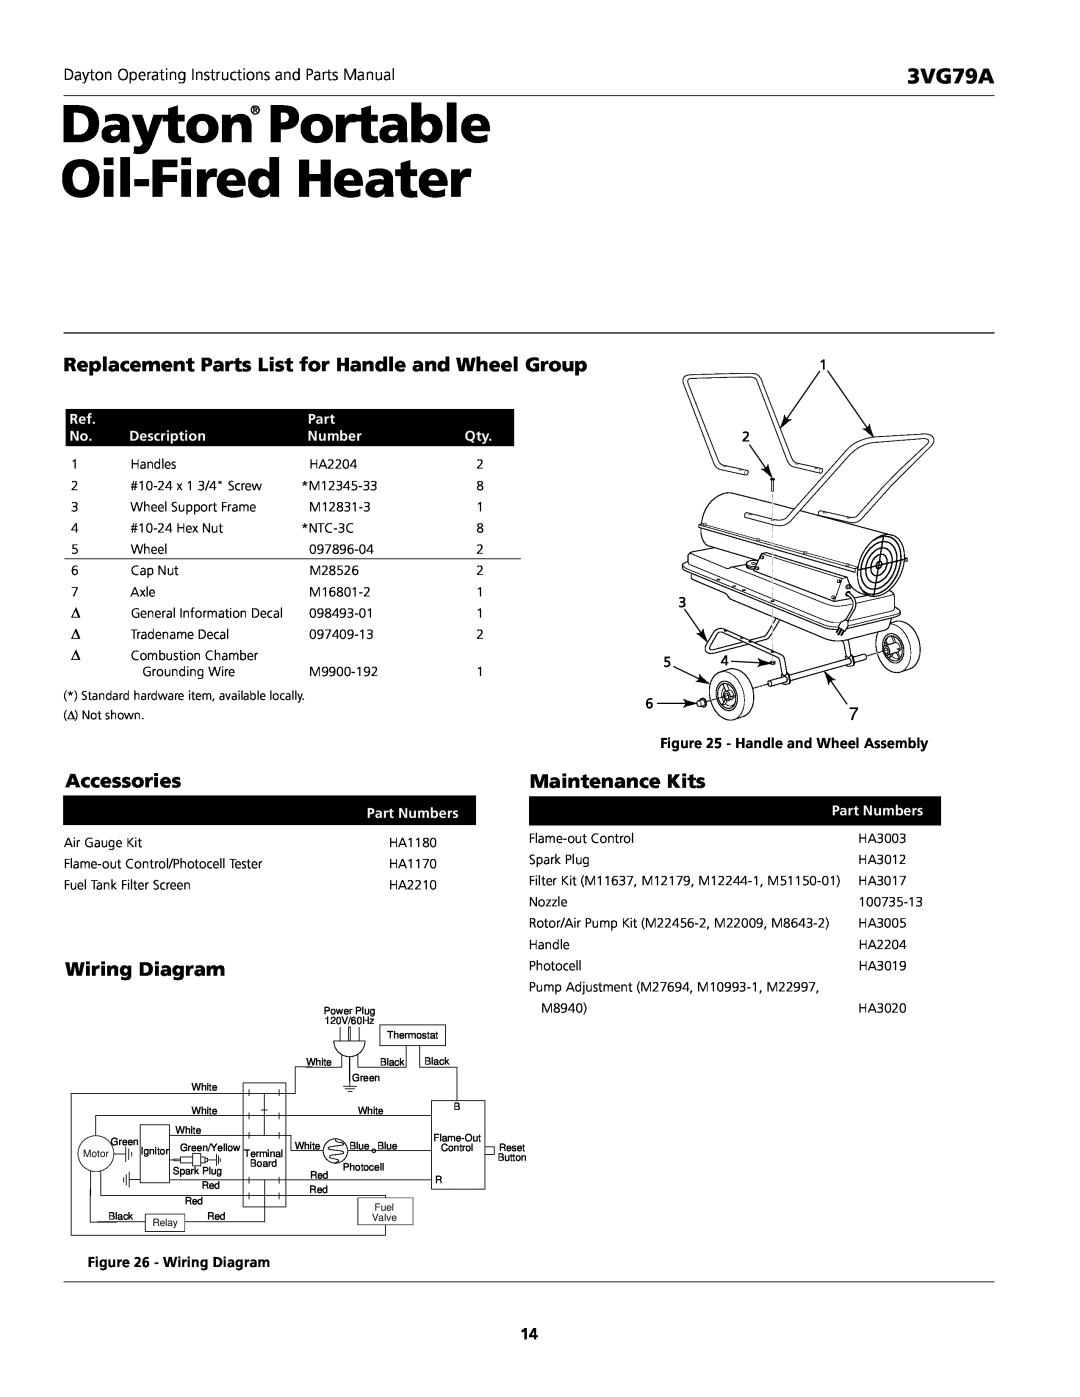 Dayton 3VG79A Dayton Portable Oil-FiredHeater, Replacement Parts List for Handle and Wheel Group, Accessories 